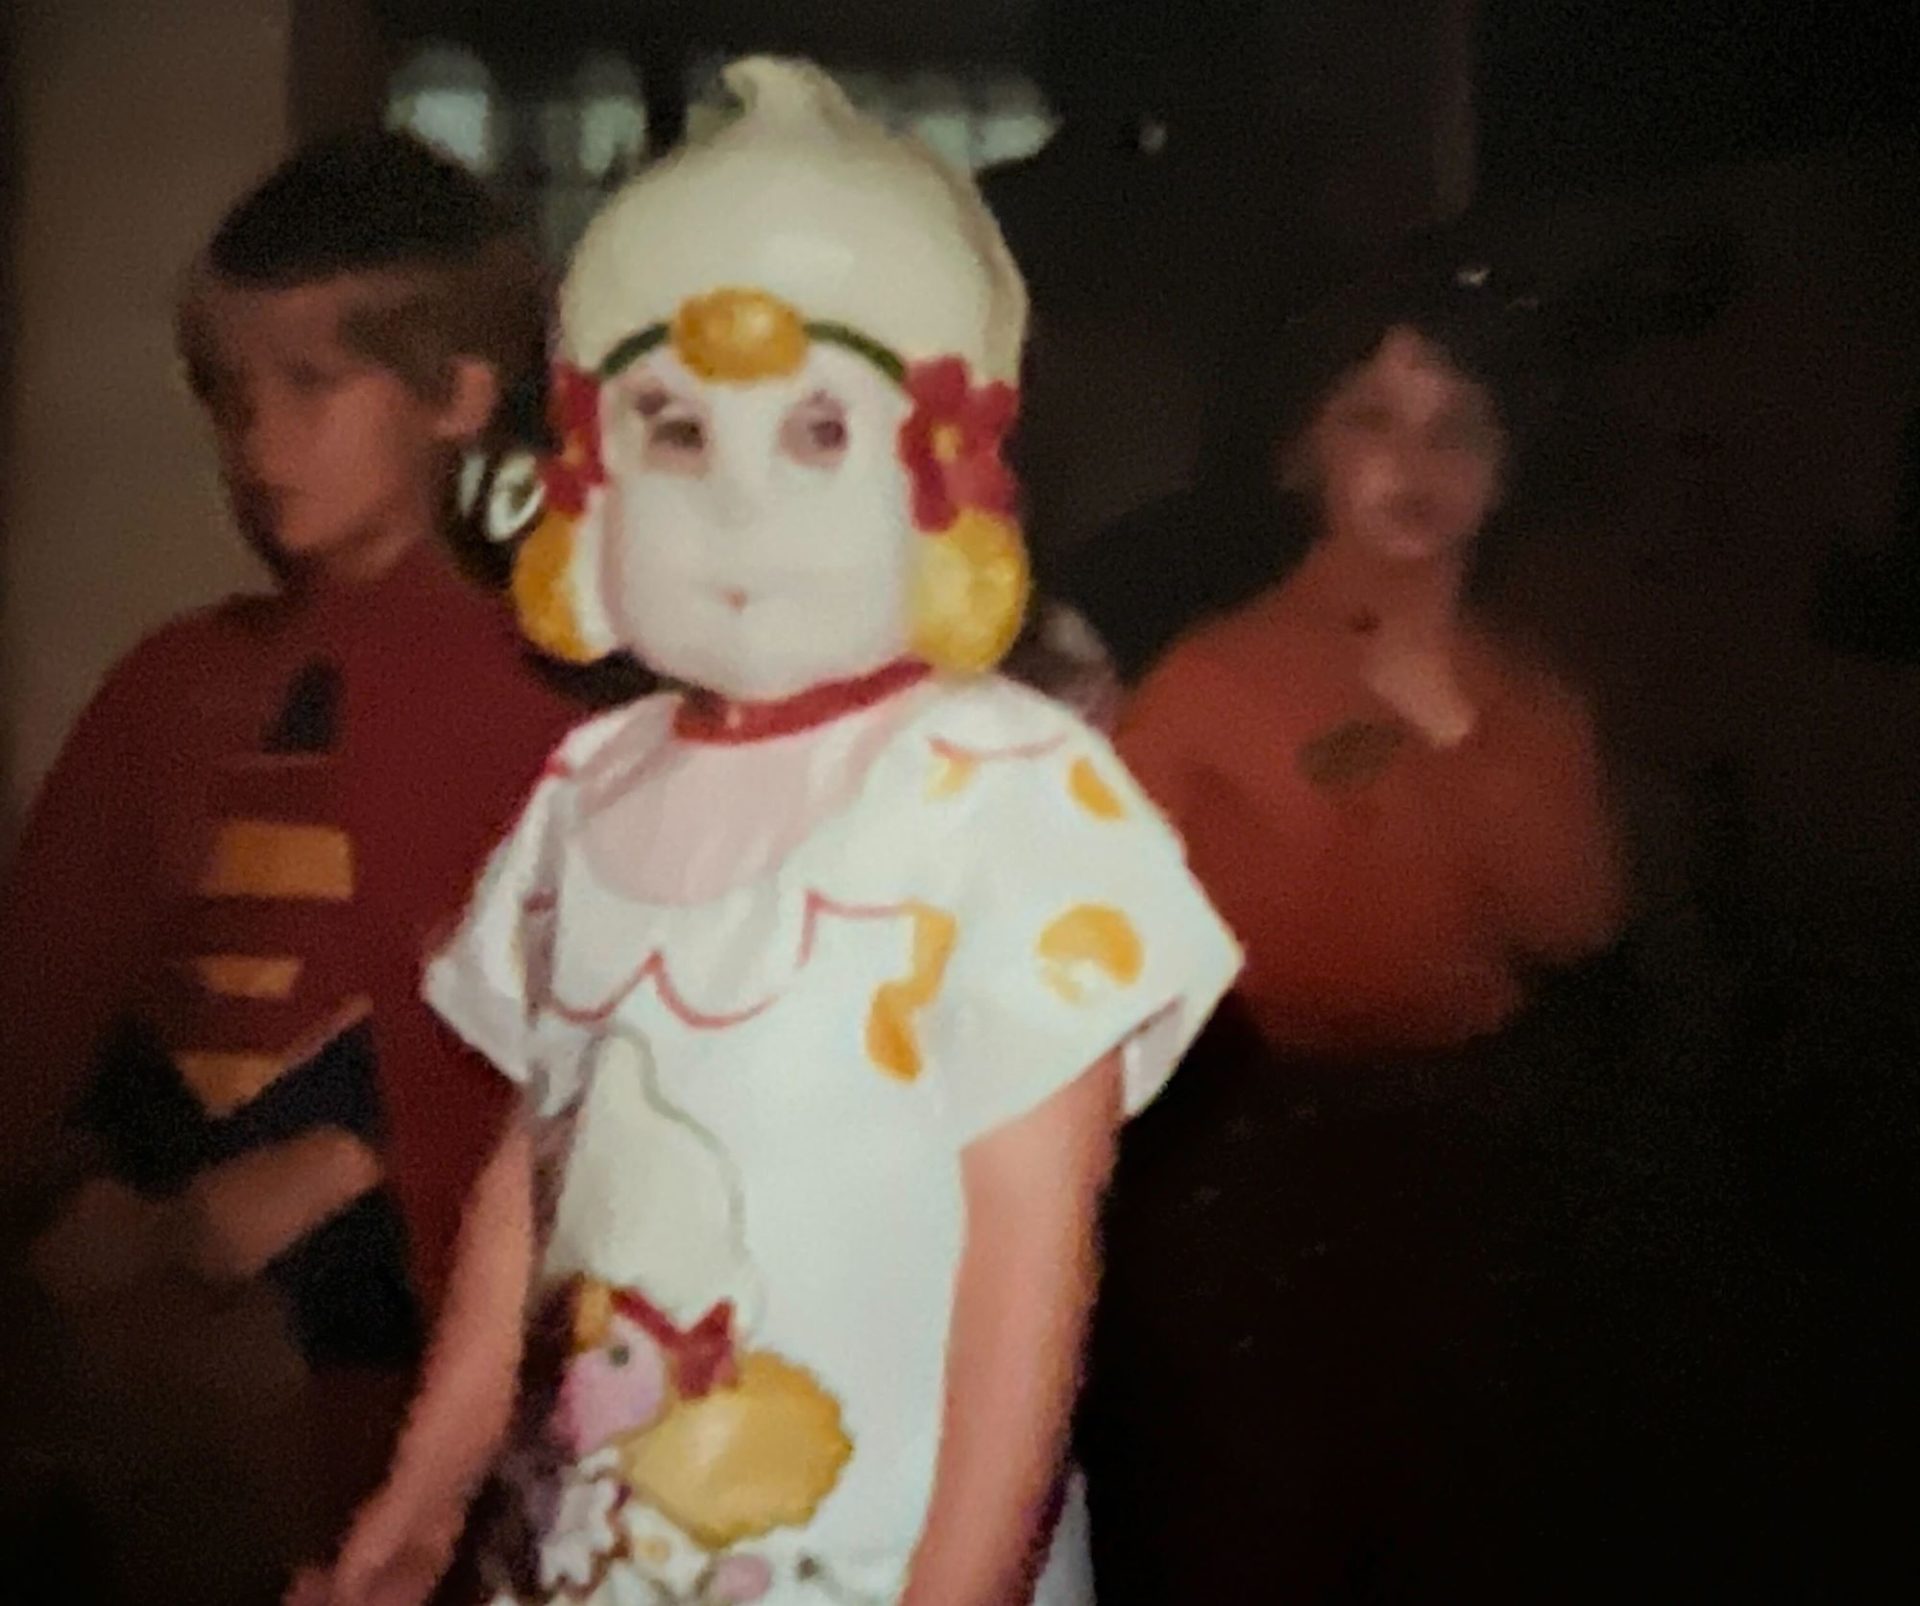 A young child dressed in a plastic Halloween dress and plastic Lemon Merengue mask.